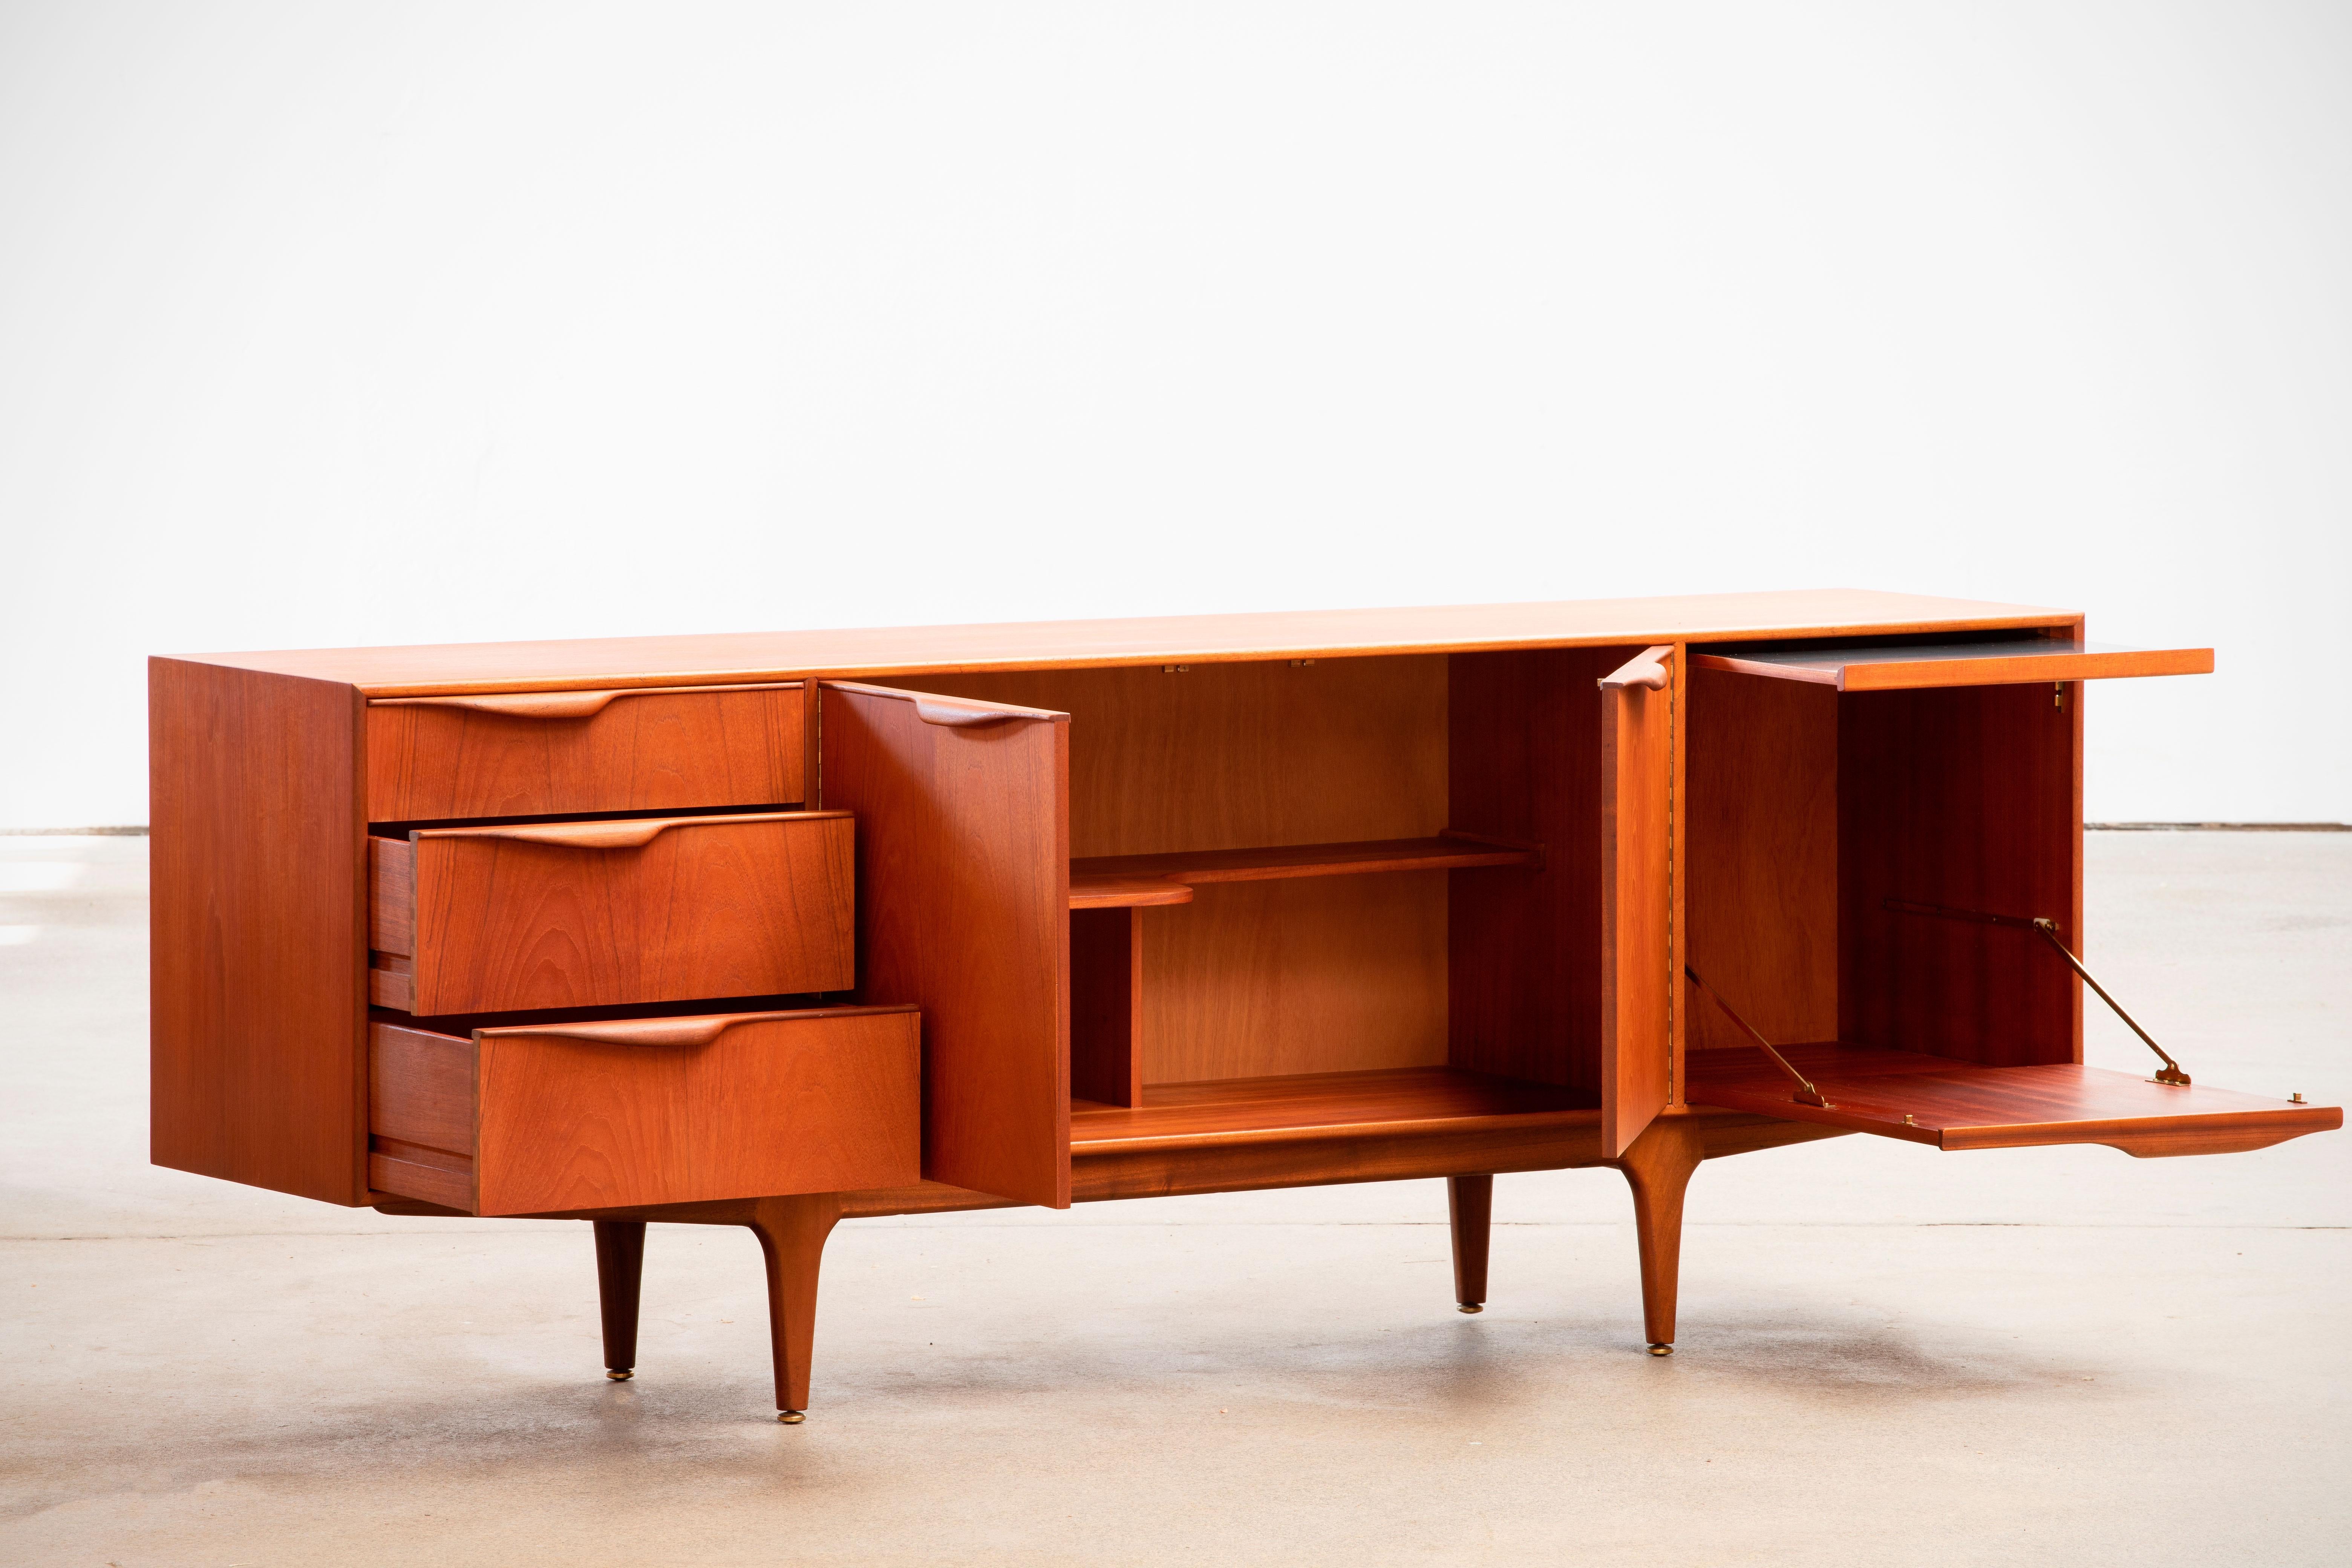 Midcentury teak sideboard Dunvegan by Mcintosh plan from the 1960s. It is a shining example of the form and function synonymous with furniture of this era. It has is all; well-built, great design and heaviness. Three doors storage space and three